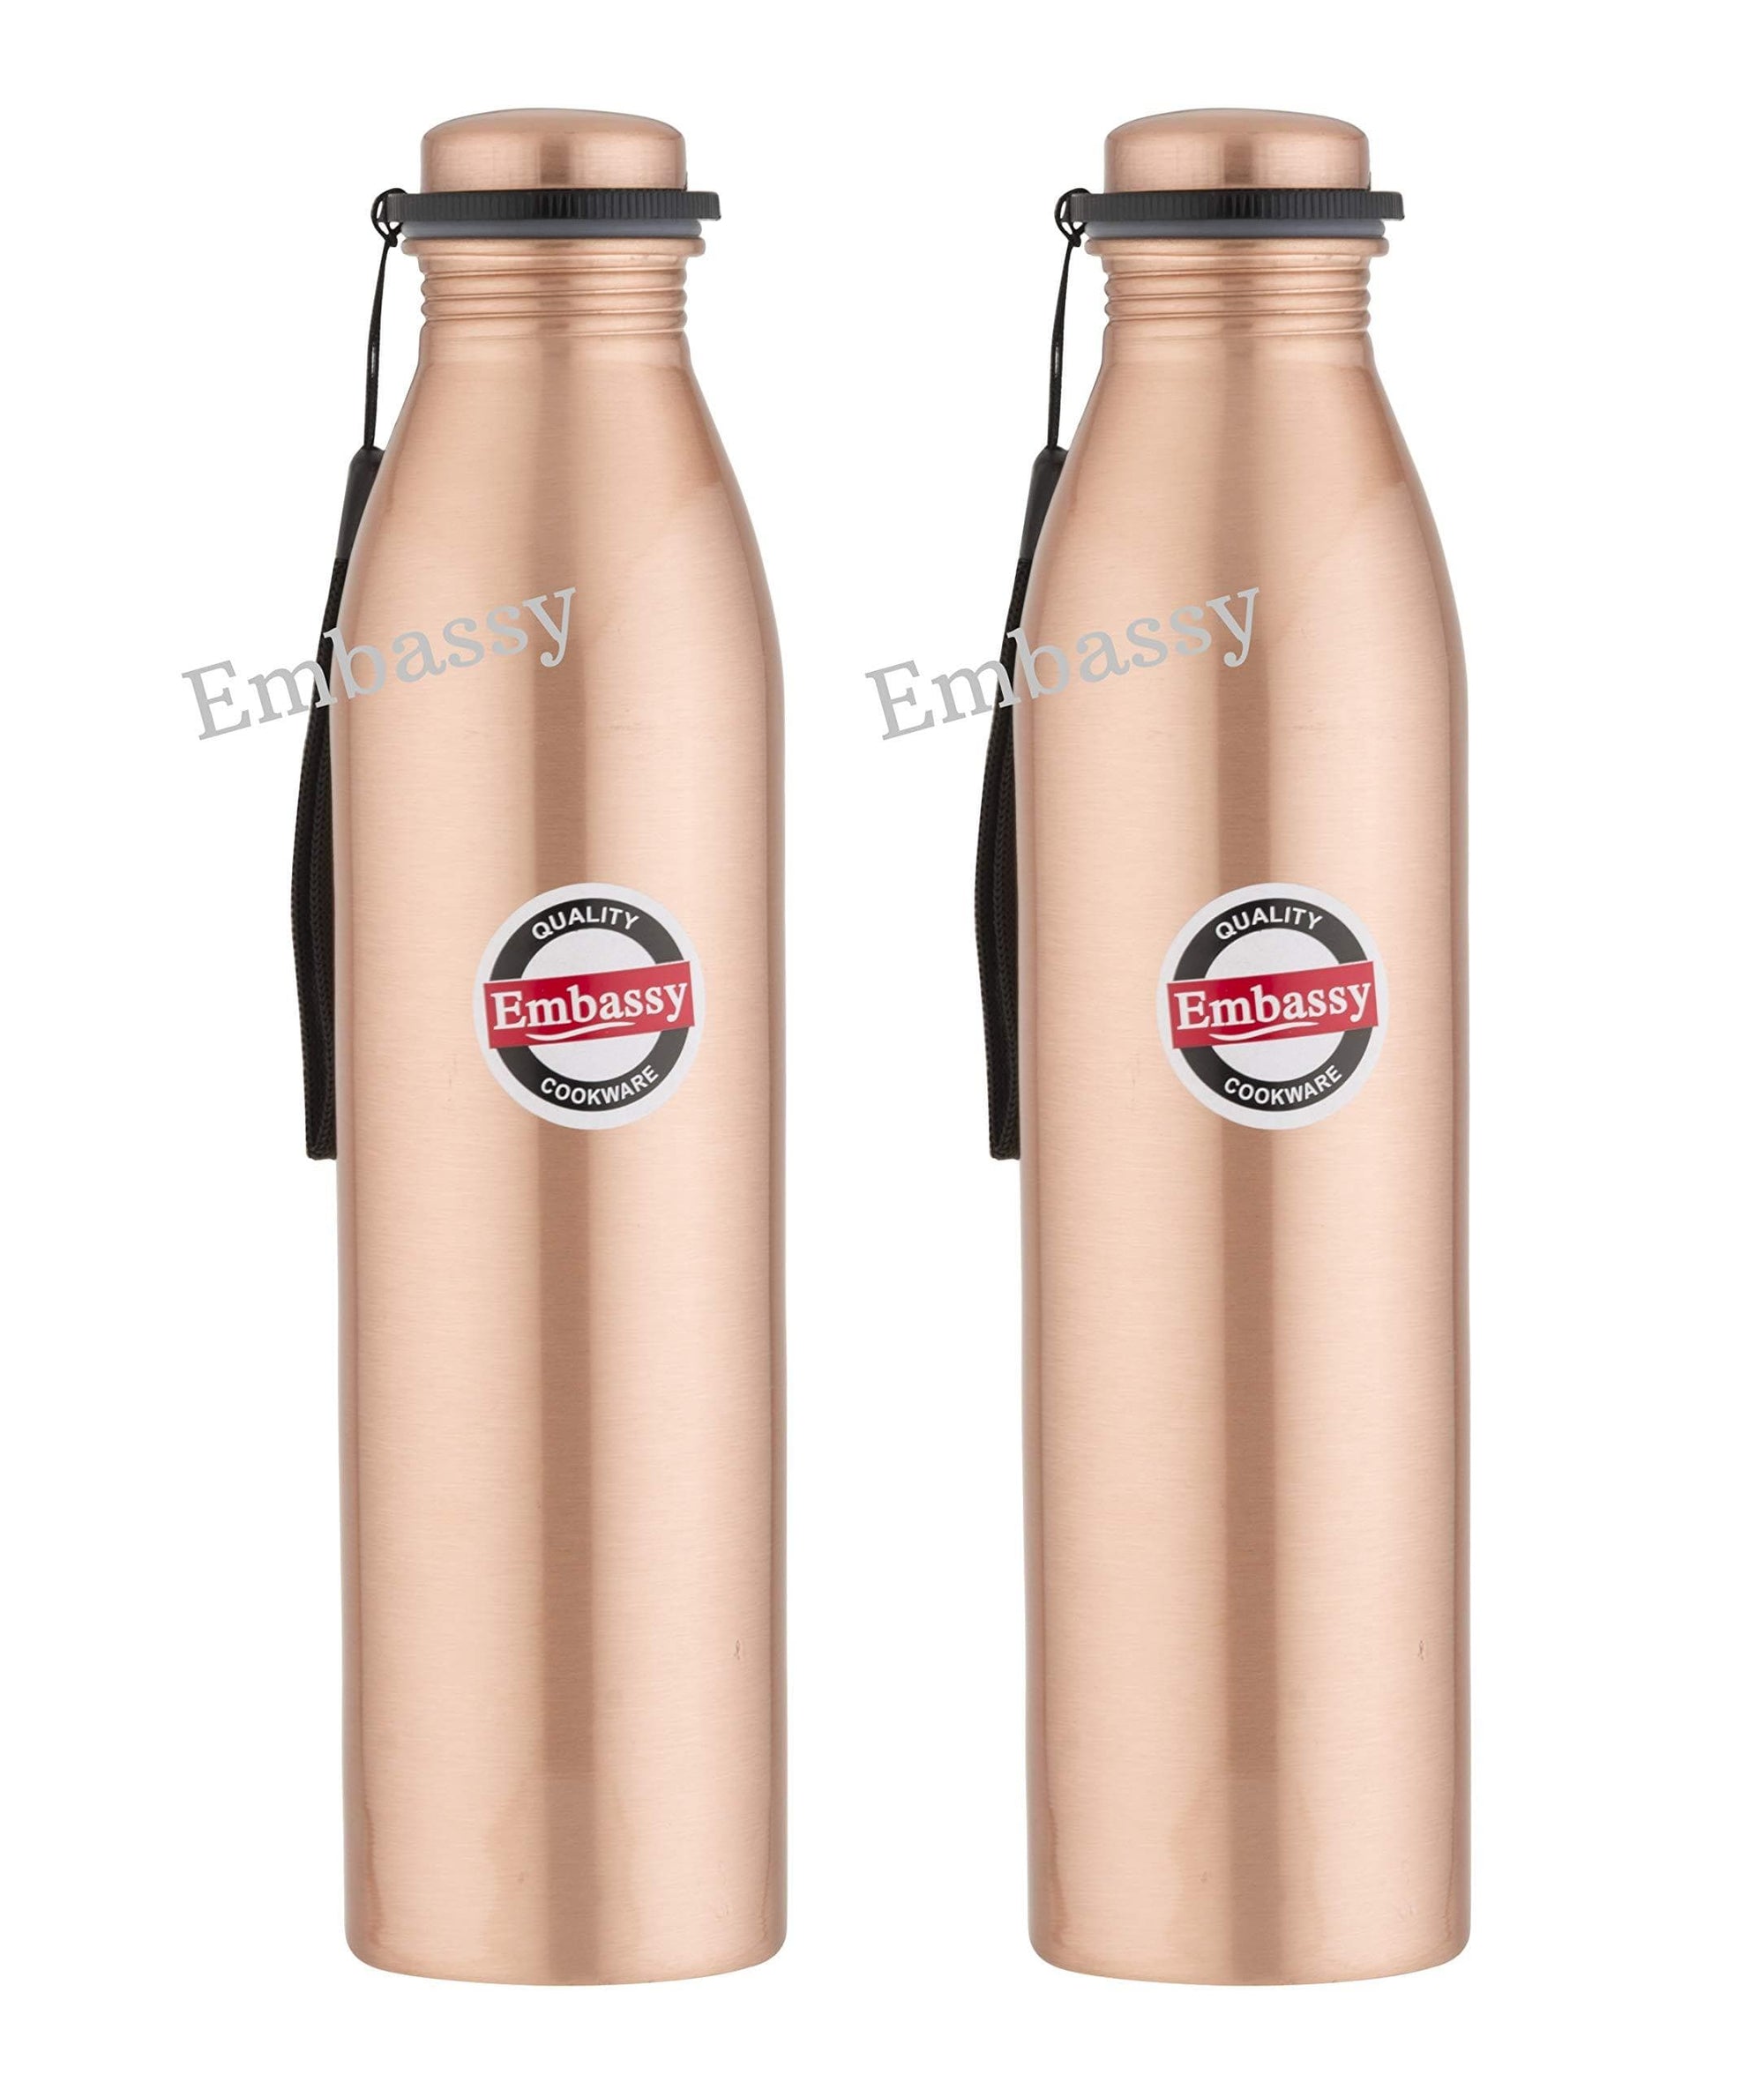 Embassy Premium Copper Water Bottle, Plain, 1000 ml, Pack of 2 - Leak-Proof, Jointless and Pure Copper - KITCHEN MART